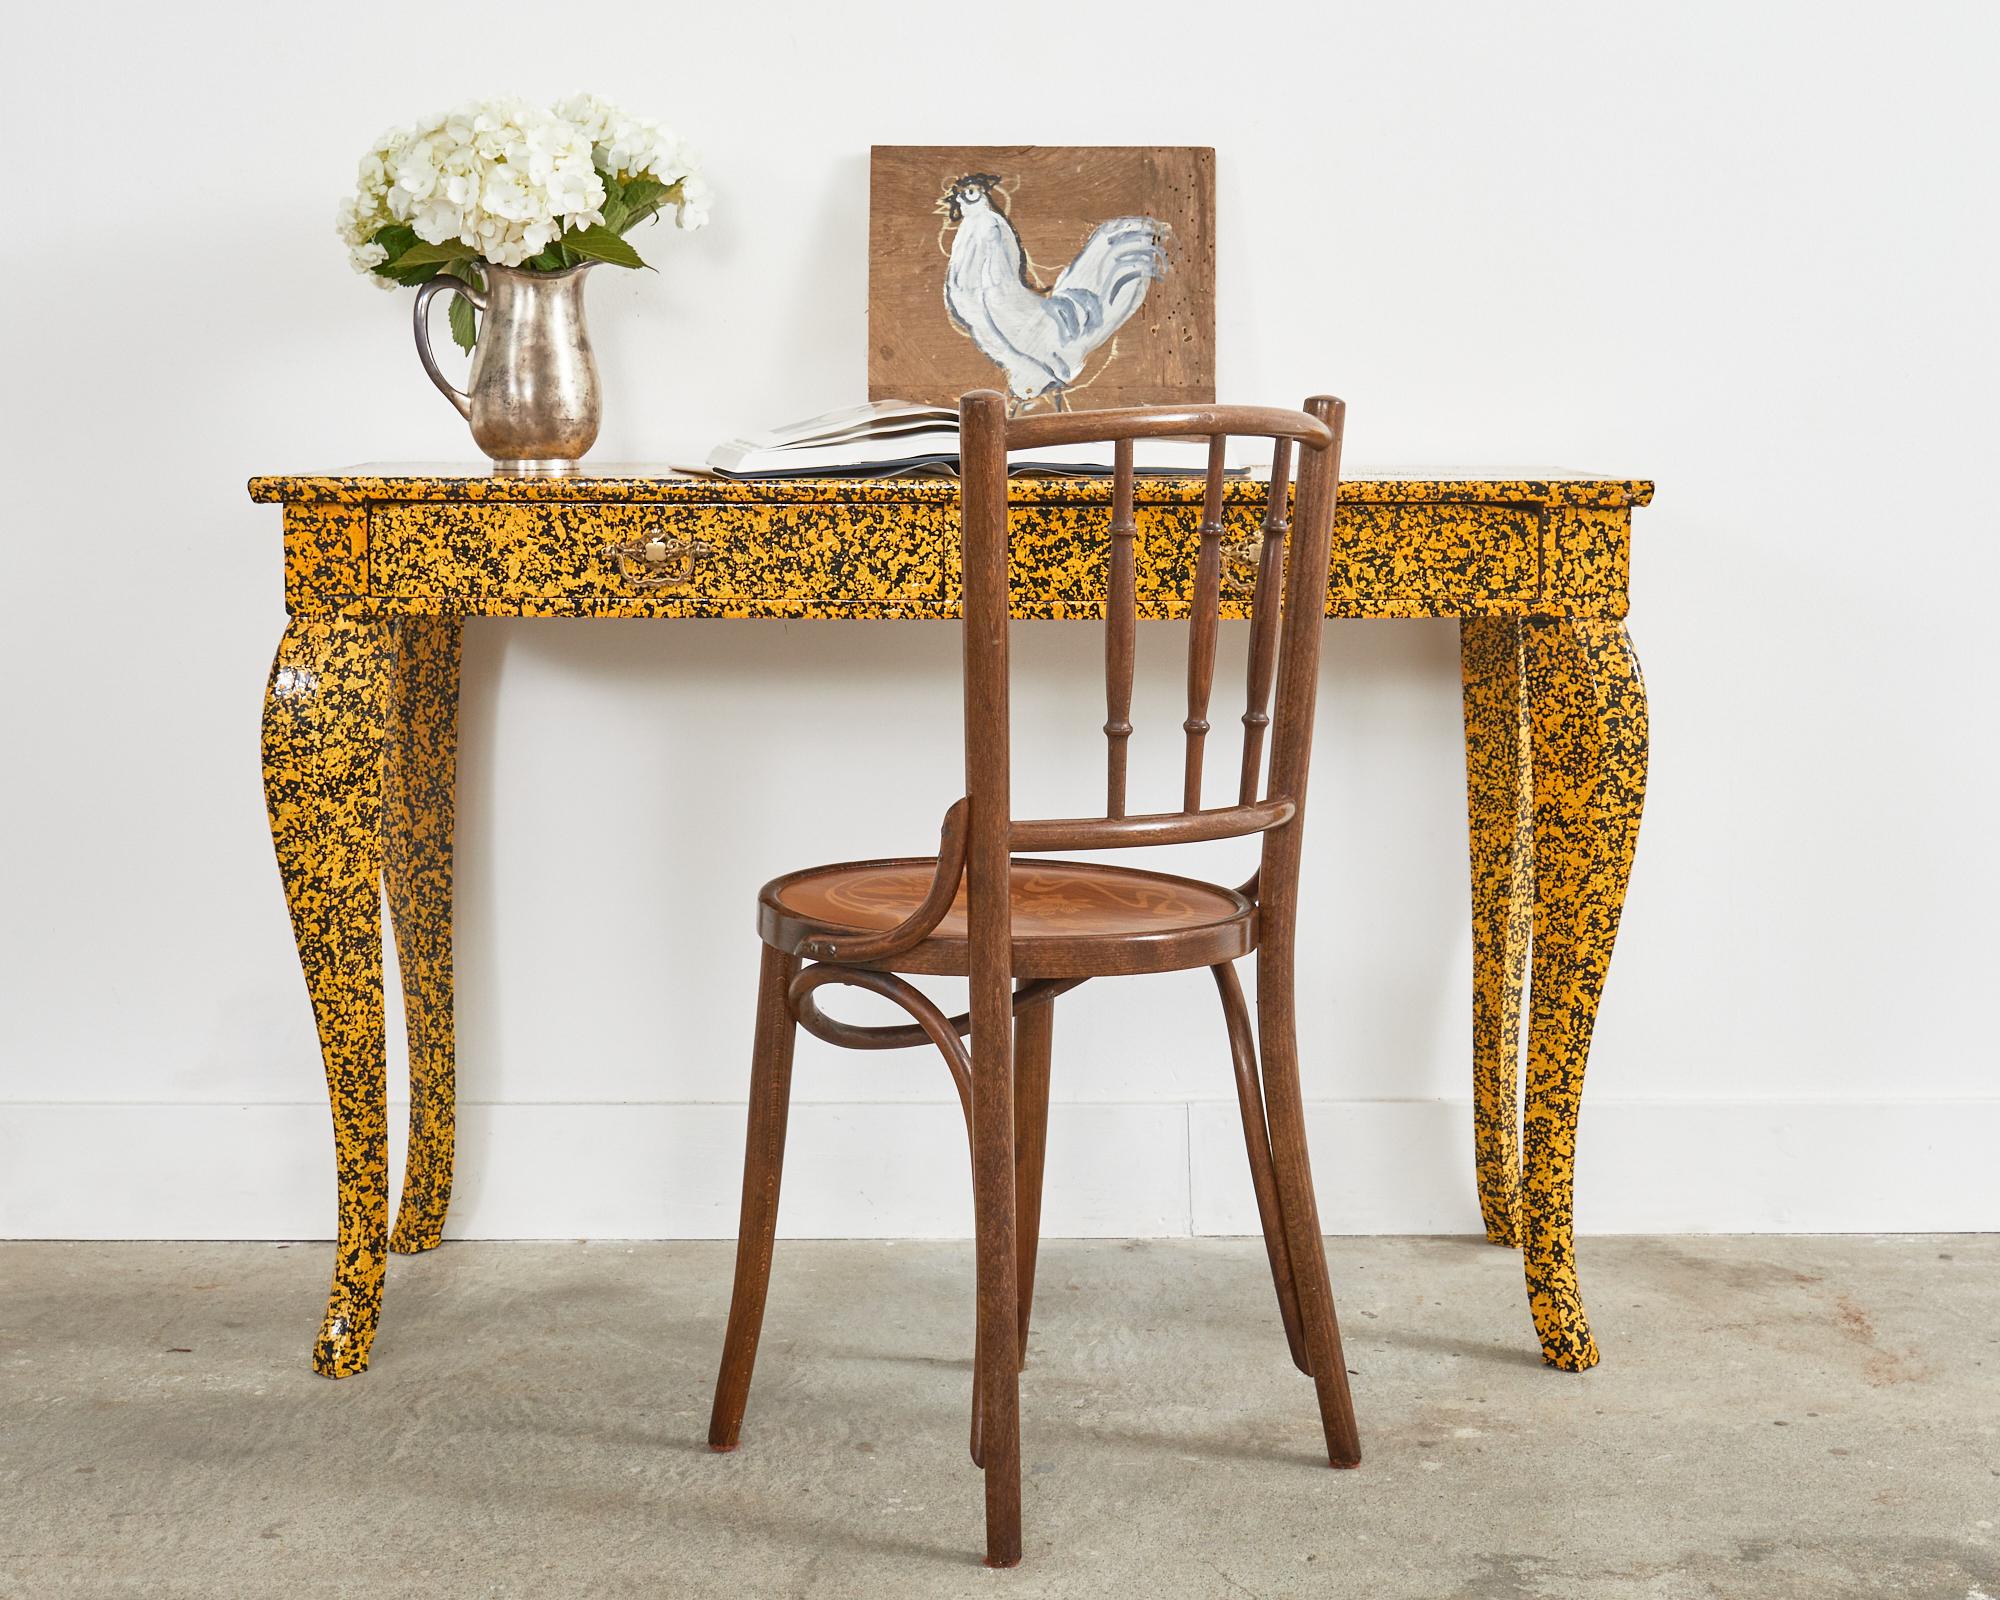 Simply stunning console table or petite writing table desk lacquer speckled by artist Ira Yeager (American 1938-2022). Beautifully crafted in the Queen Anne style fronted by two storage drawers having brass pulls. The case is supported by elegant